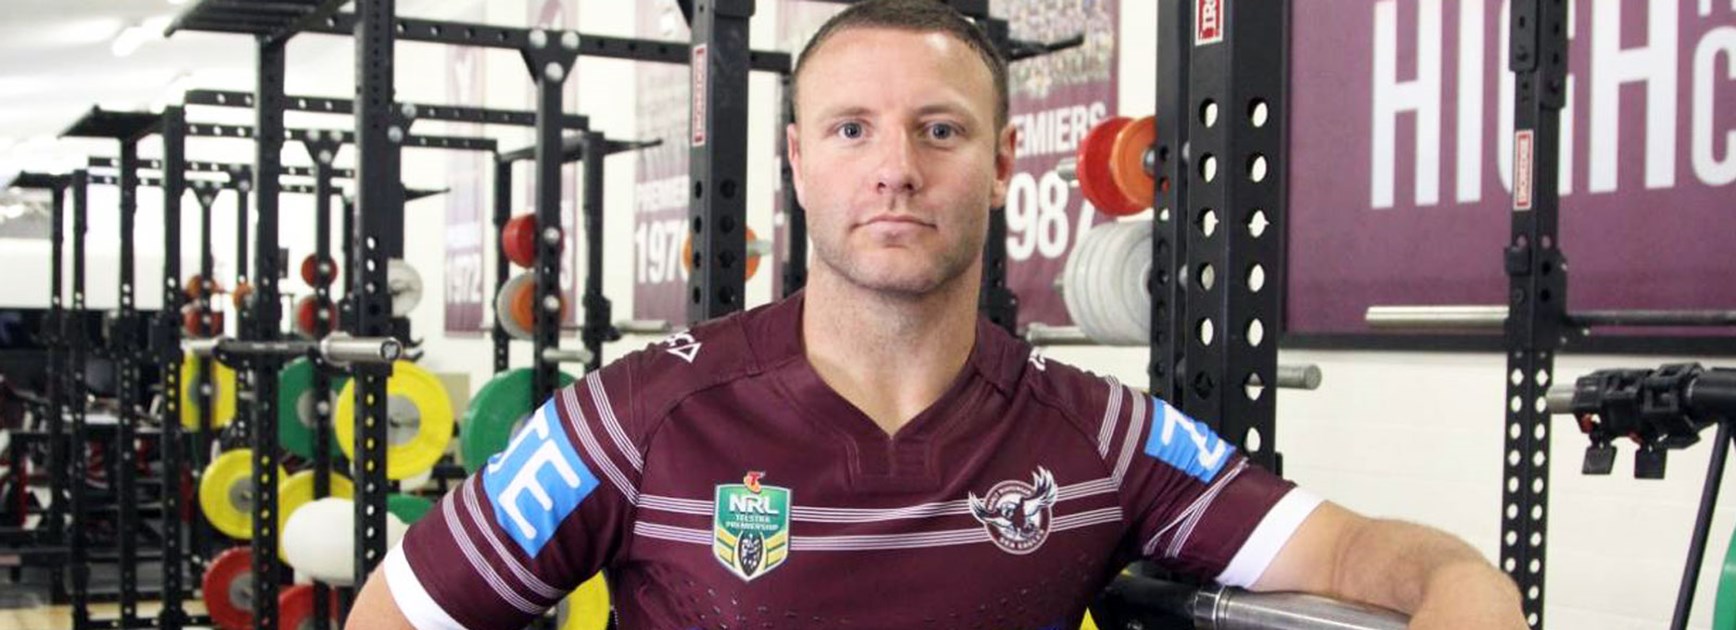 Sea Eagles recruit Blake Green hopes to take the pressure off Daly Cherry-Evans.